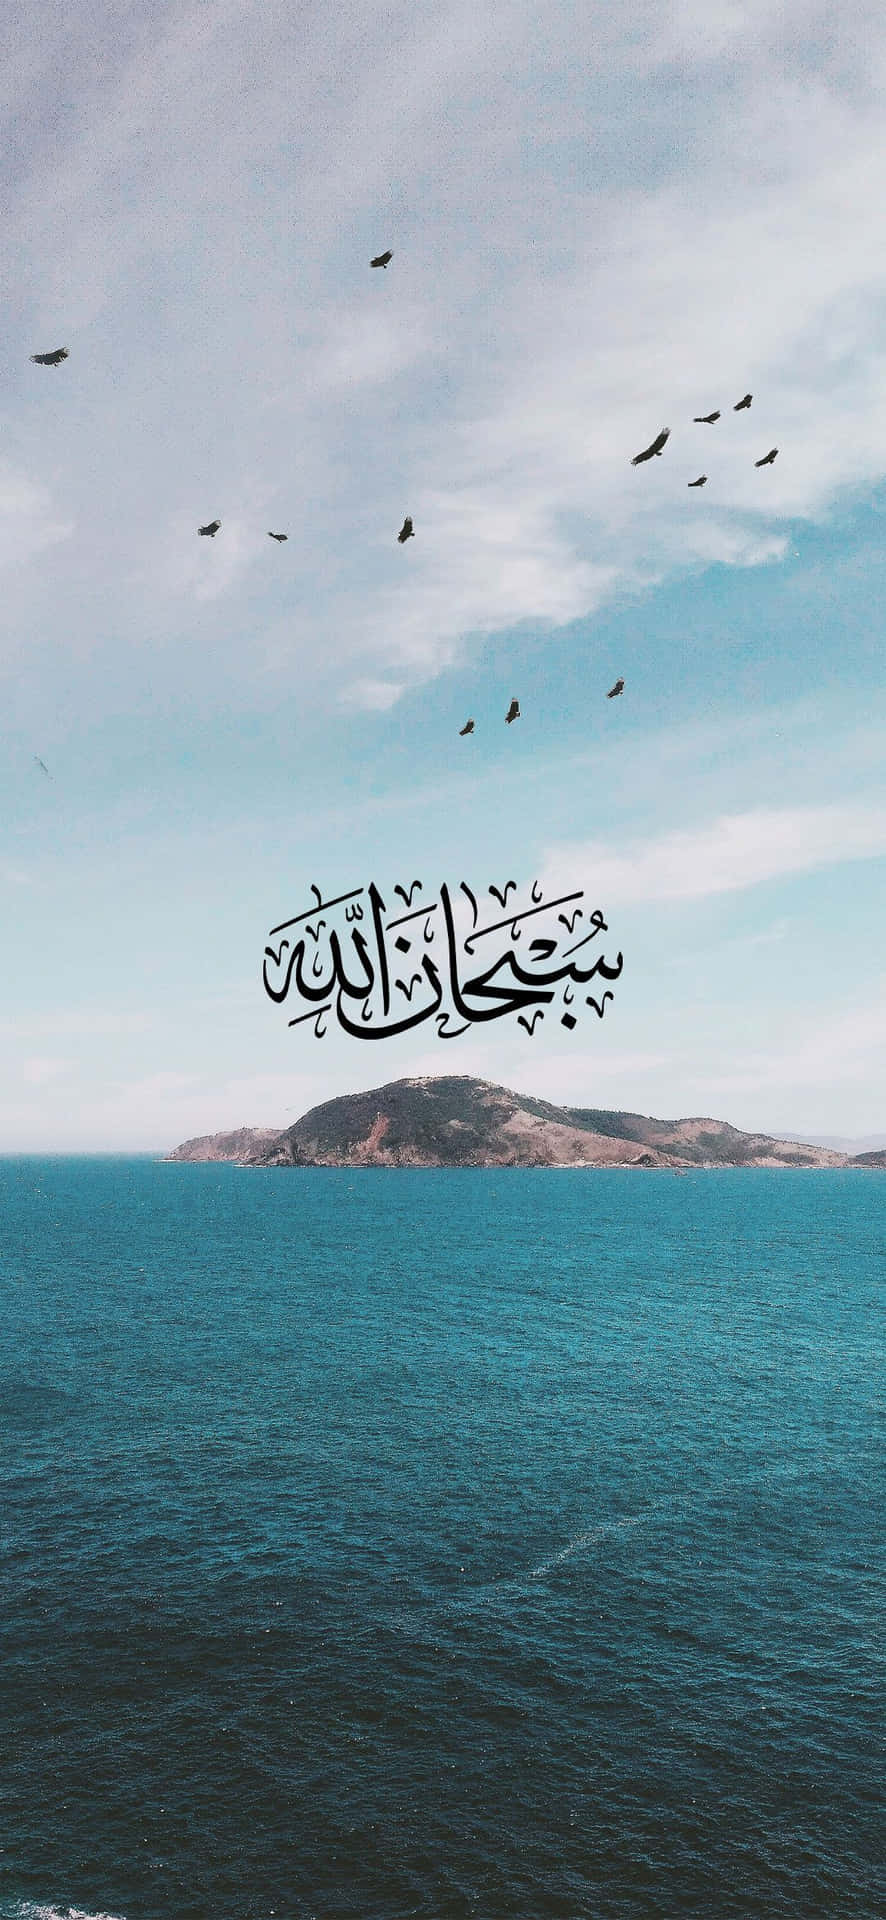 Islamic_ Calligraphy_ Over_ Sea_and_ Mountain Wallpaper